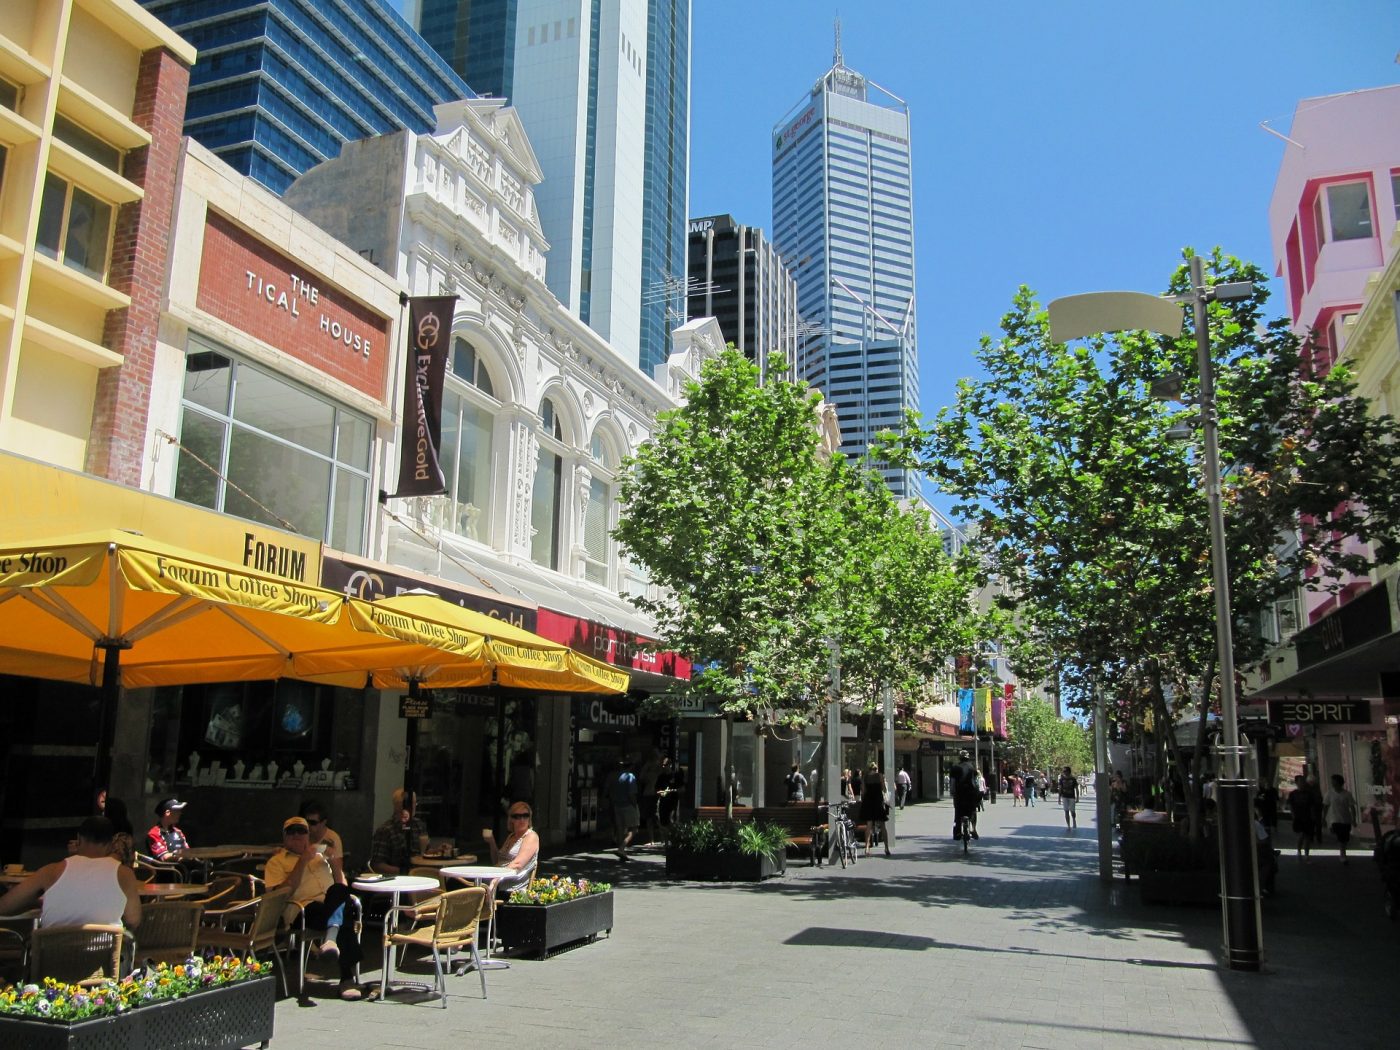 Western Australia Itinerary: The streets of Perth